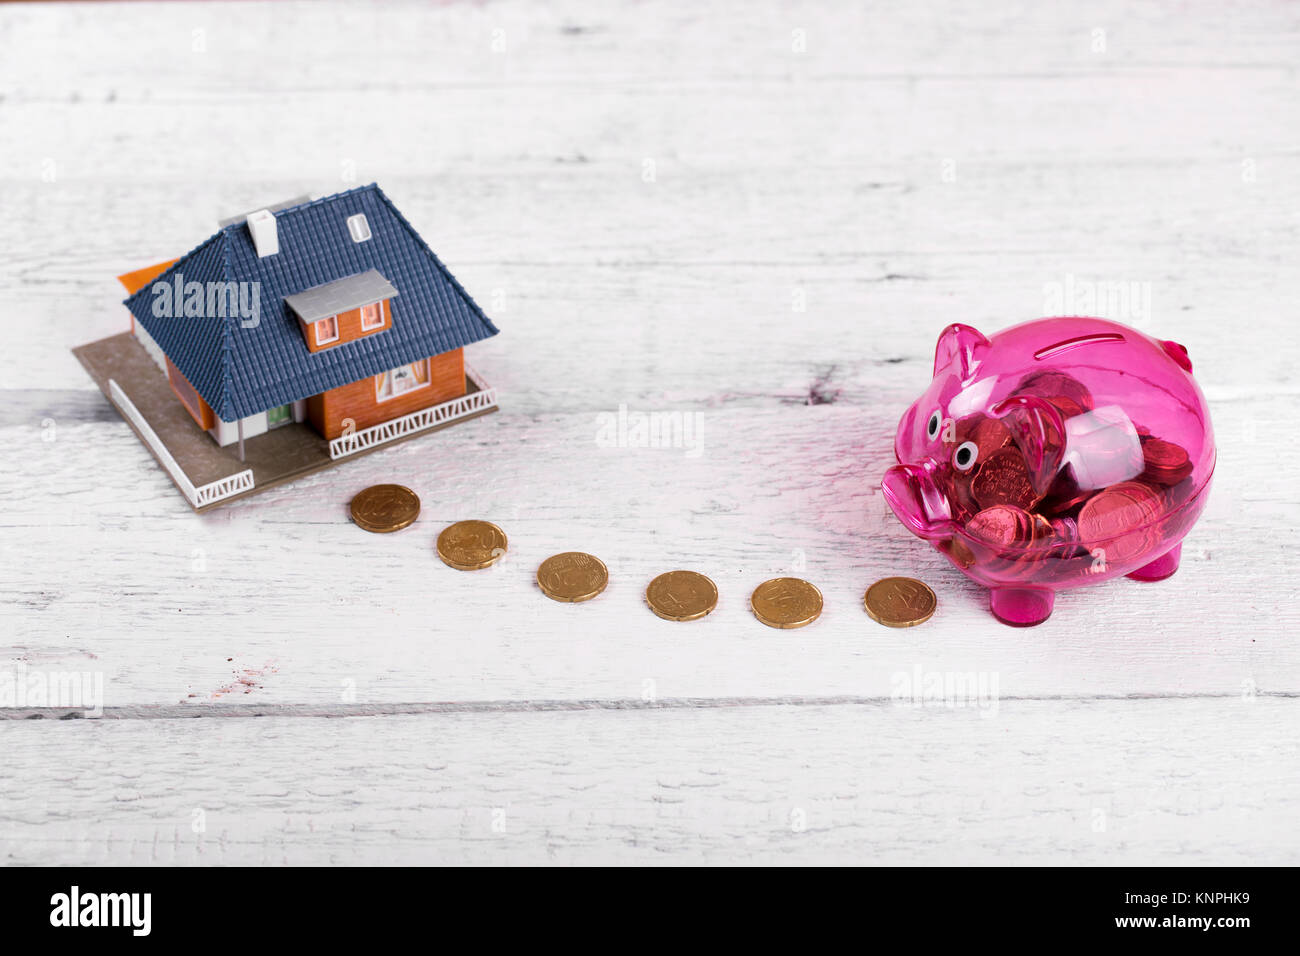 buy a house, home savings or real estate investment concept Stock Photo